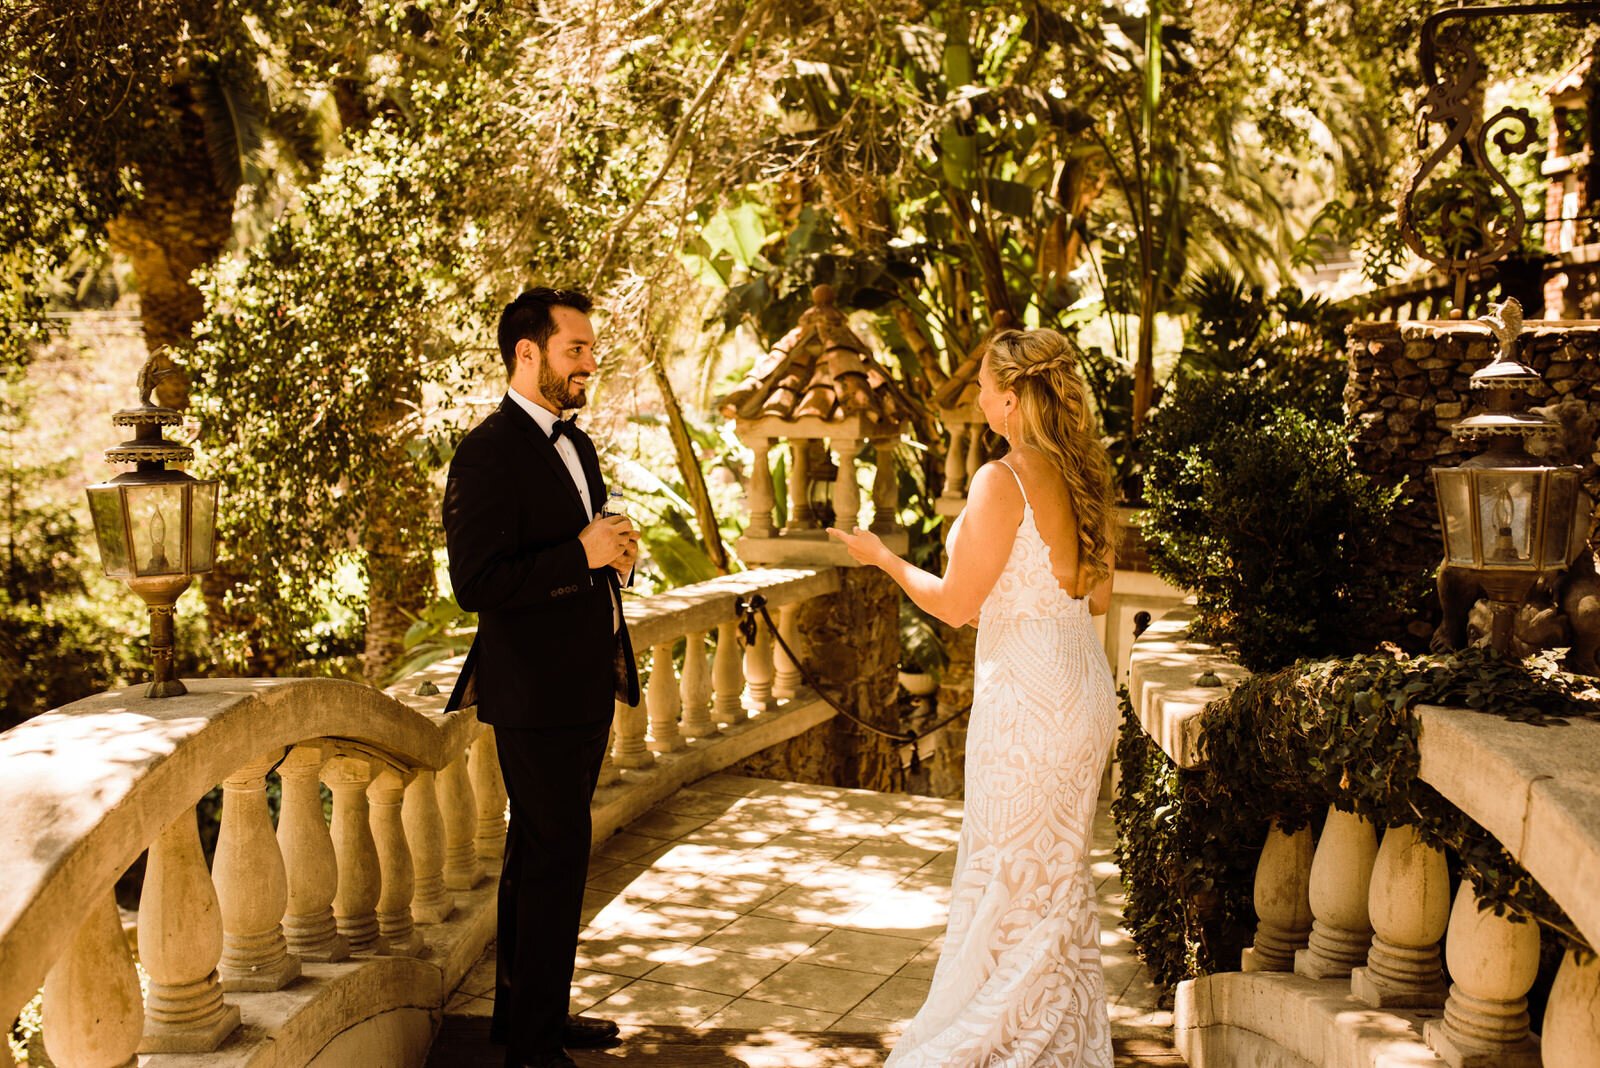 Romantic first look at Hollywood Hills wedding venue Houdini Estate